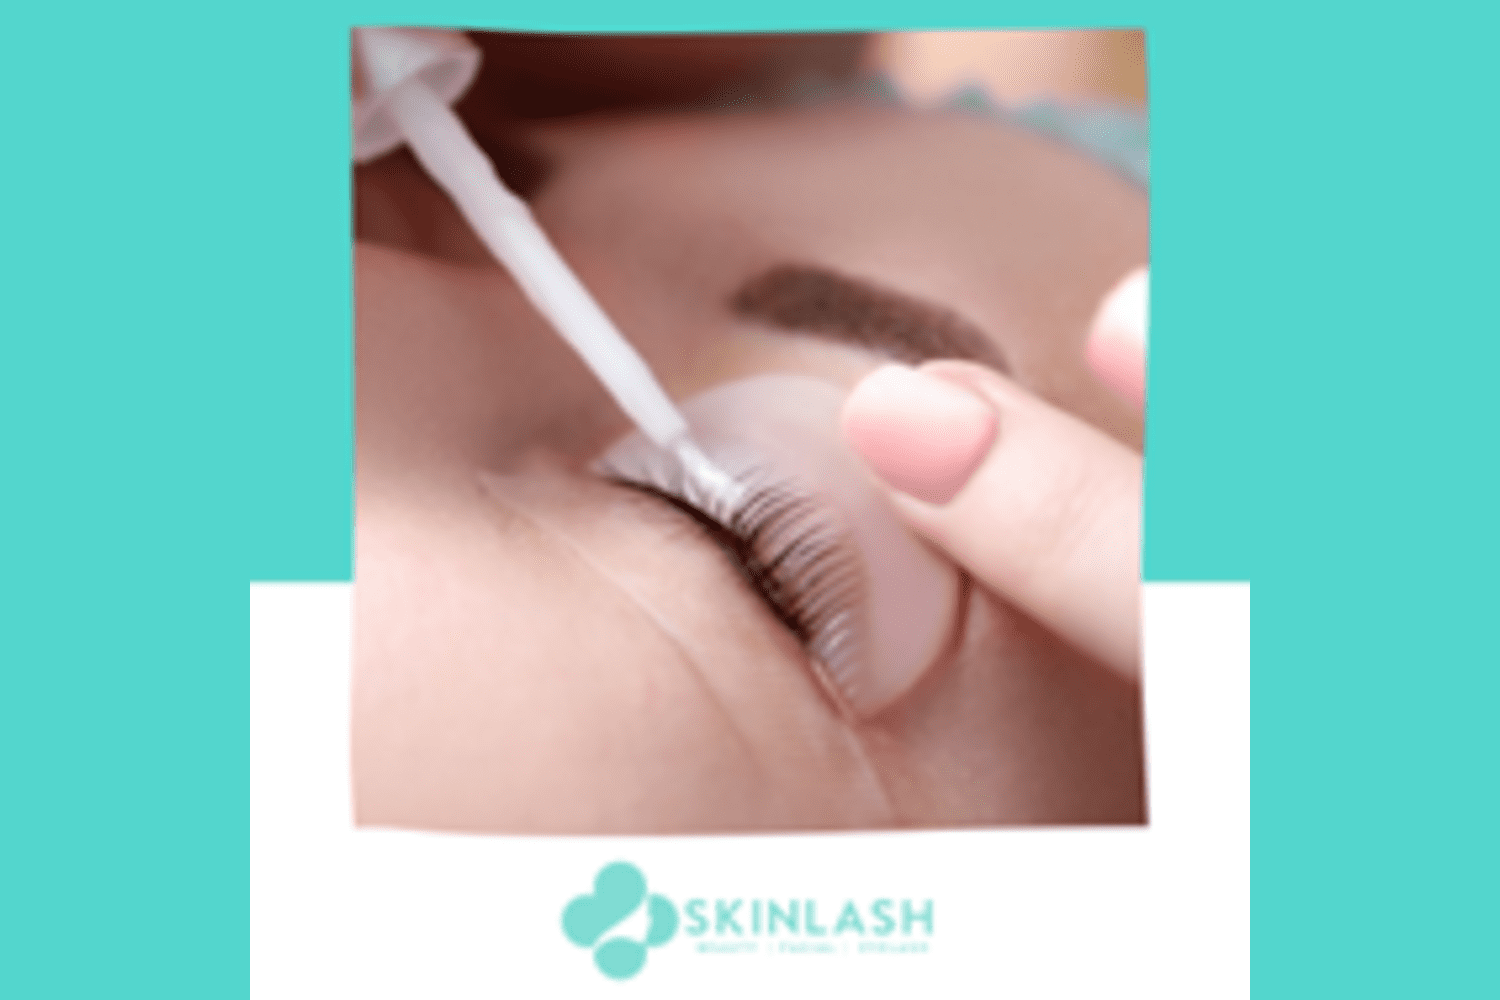 100 Strand Japanese Lash by Lash Extension + Lash Spa (1 Session) at Skinlash - Get Deals, Cashback and Rewards with ShopBack GO